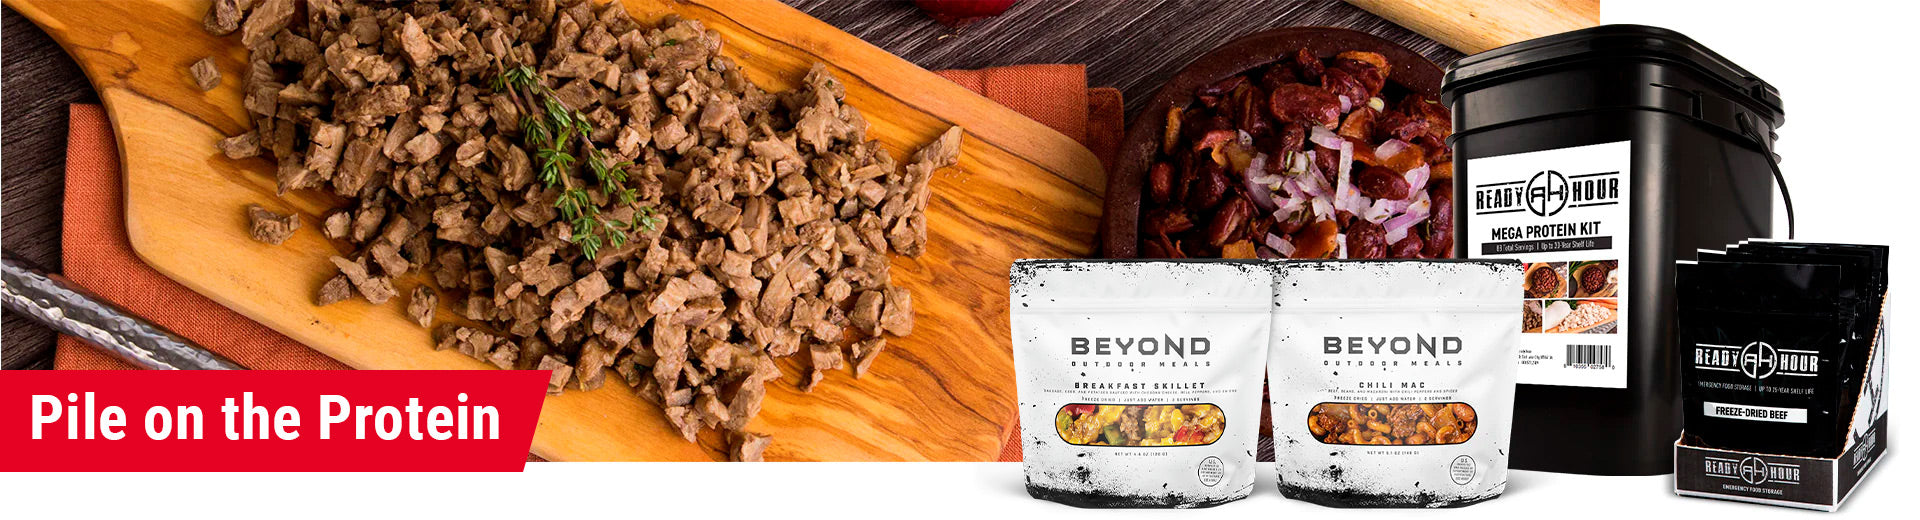 Meat & Protein Kits - Beans and Beef on cutting board